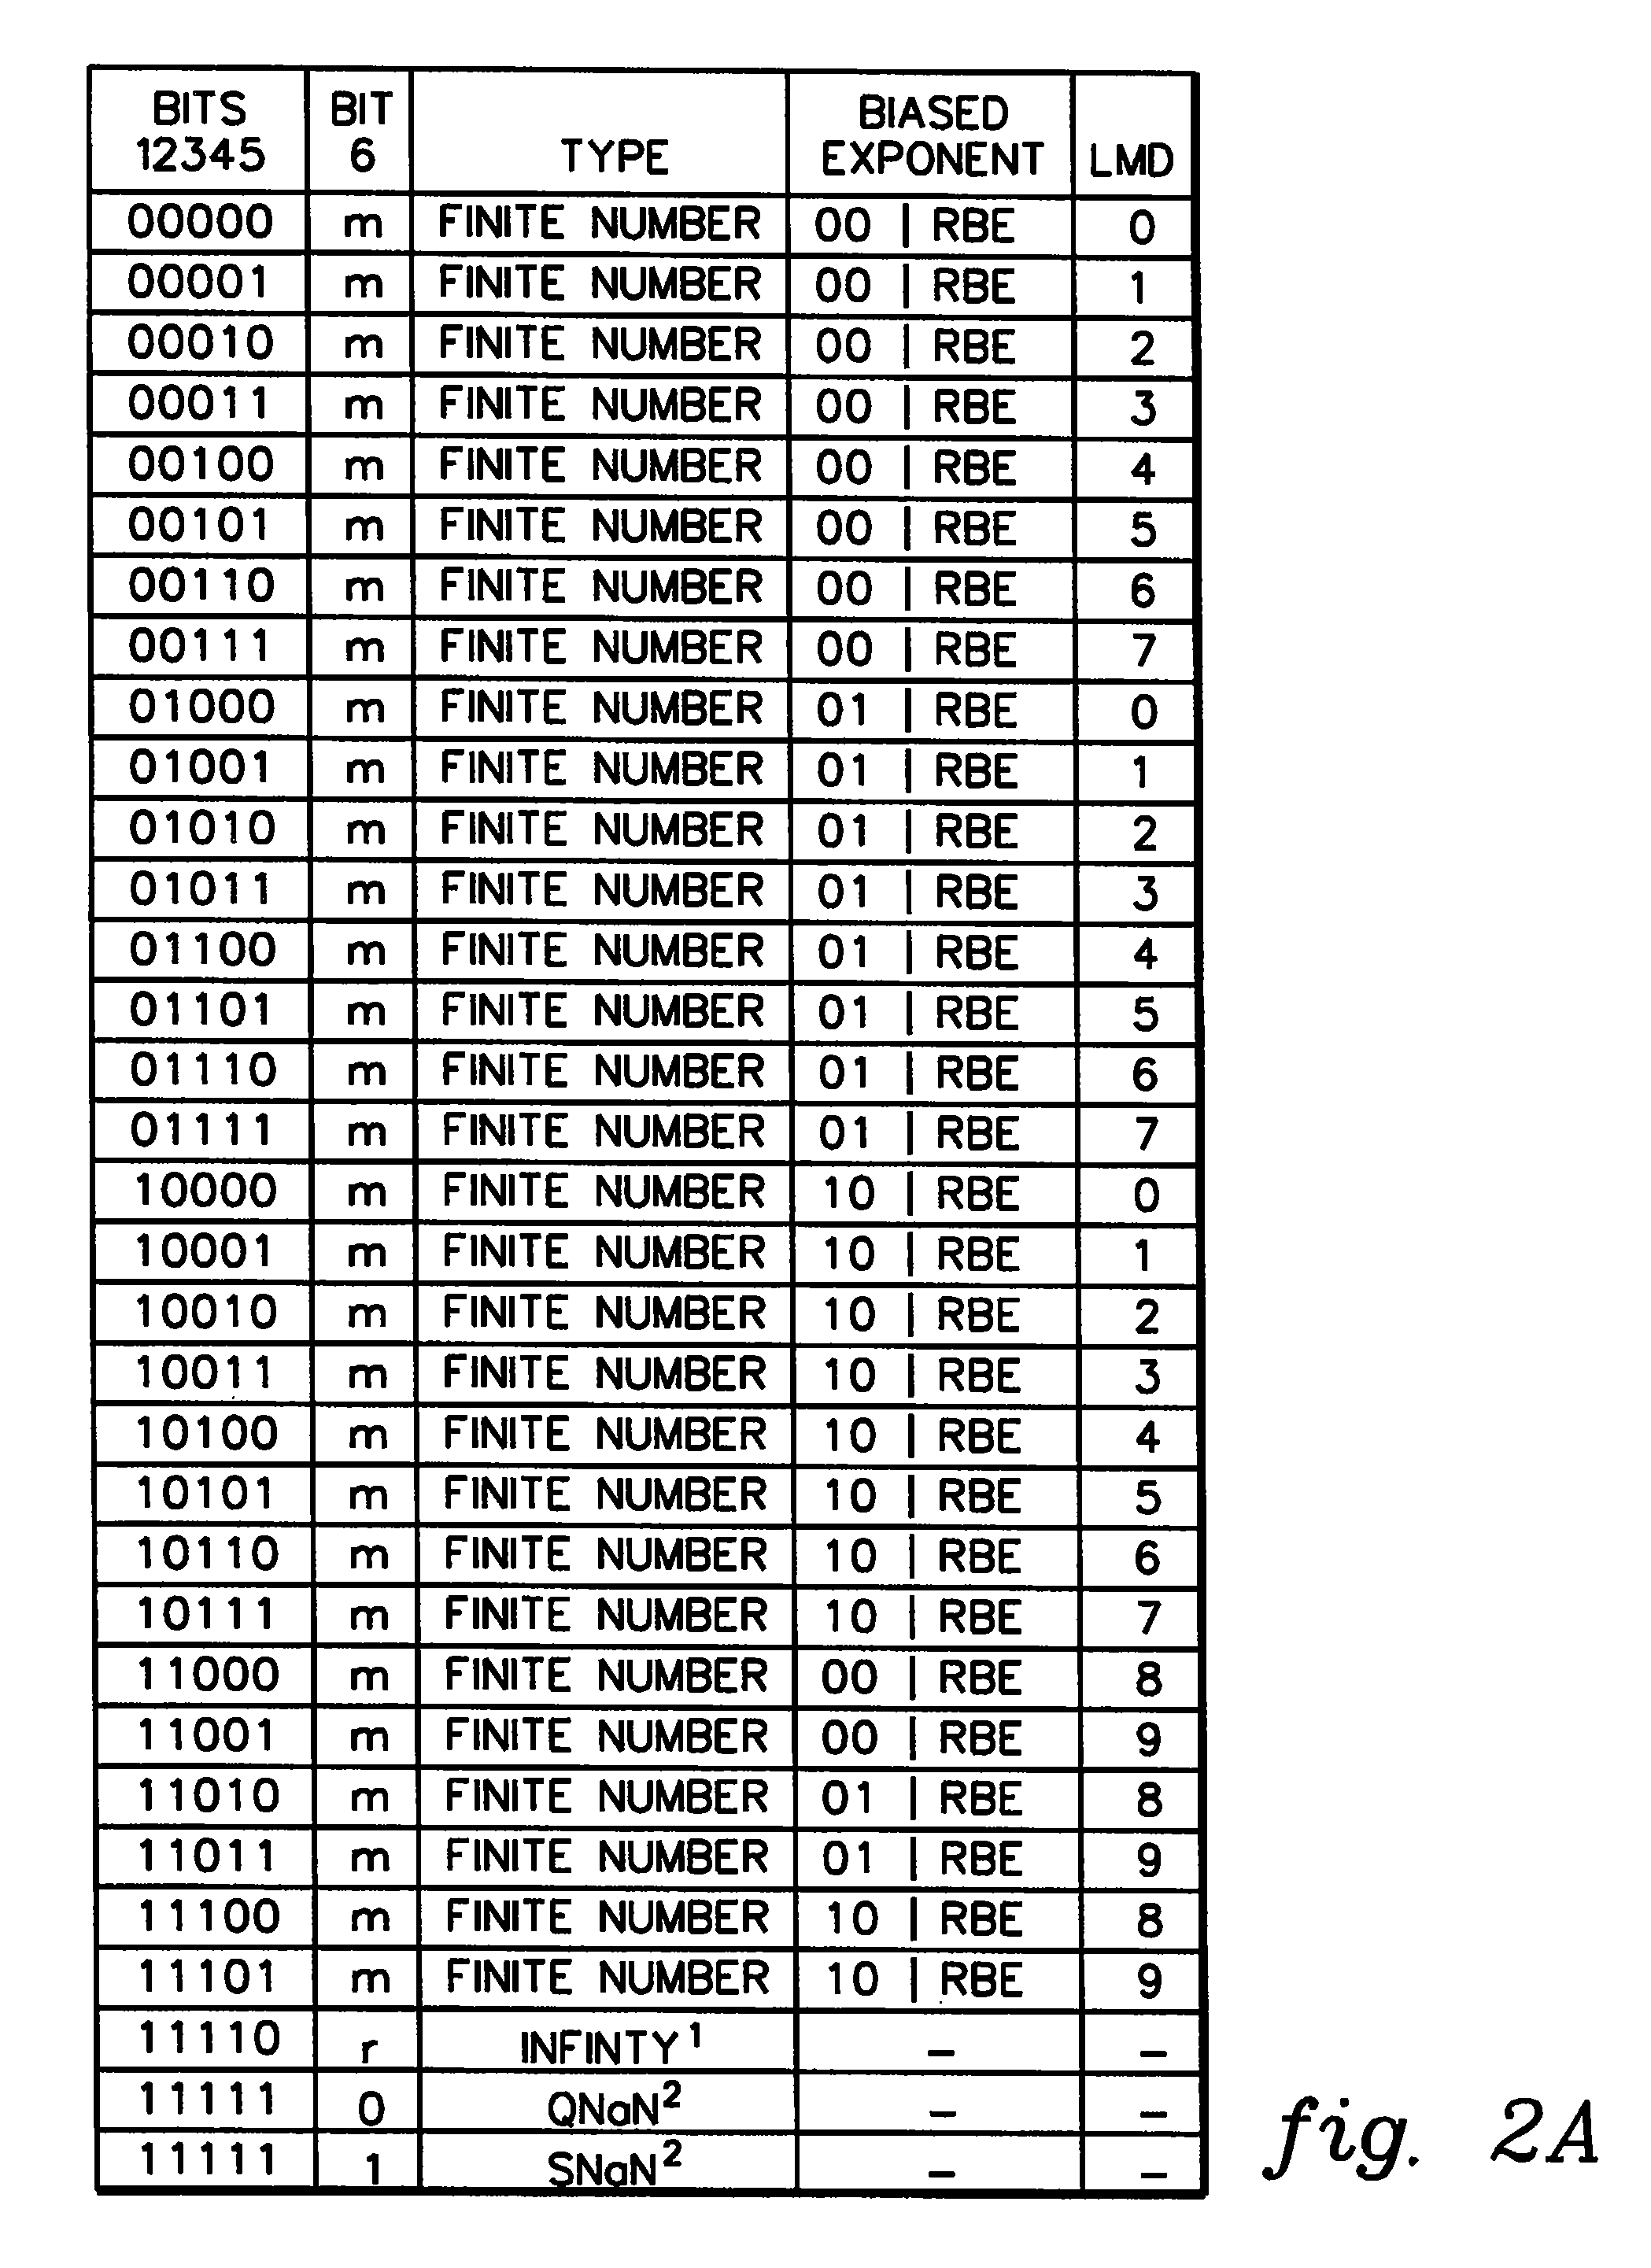 Composition/decomposition of decimal floating point data